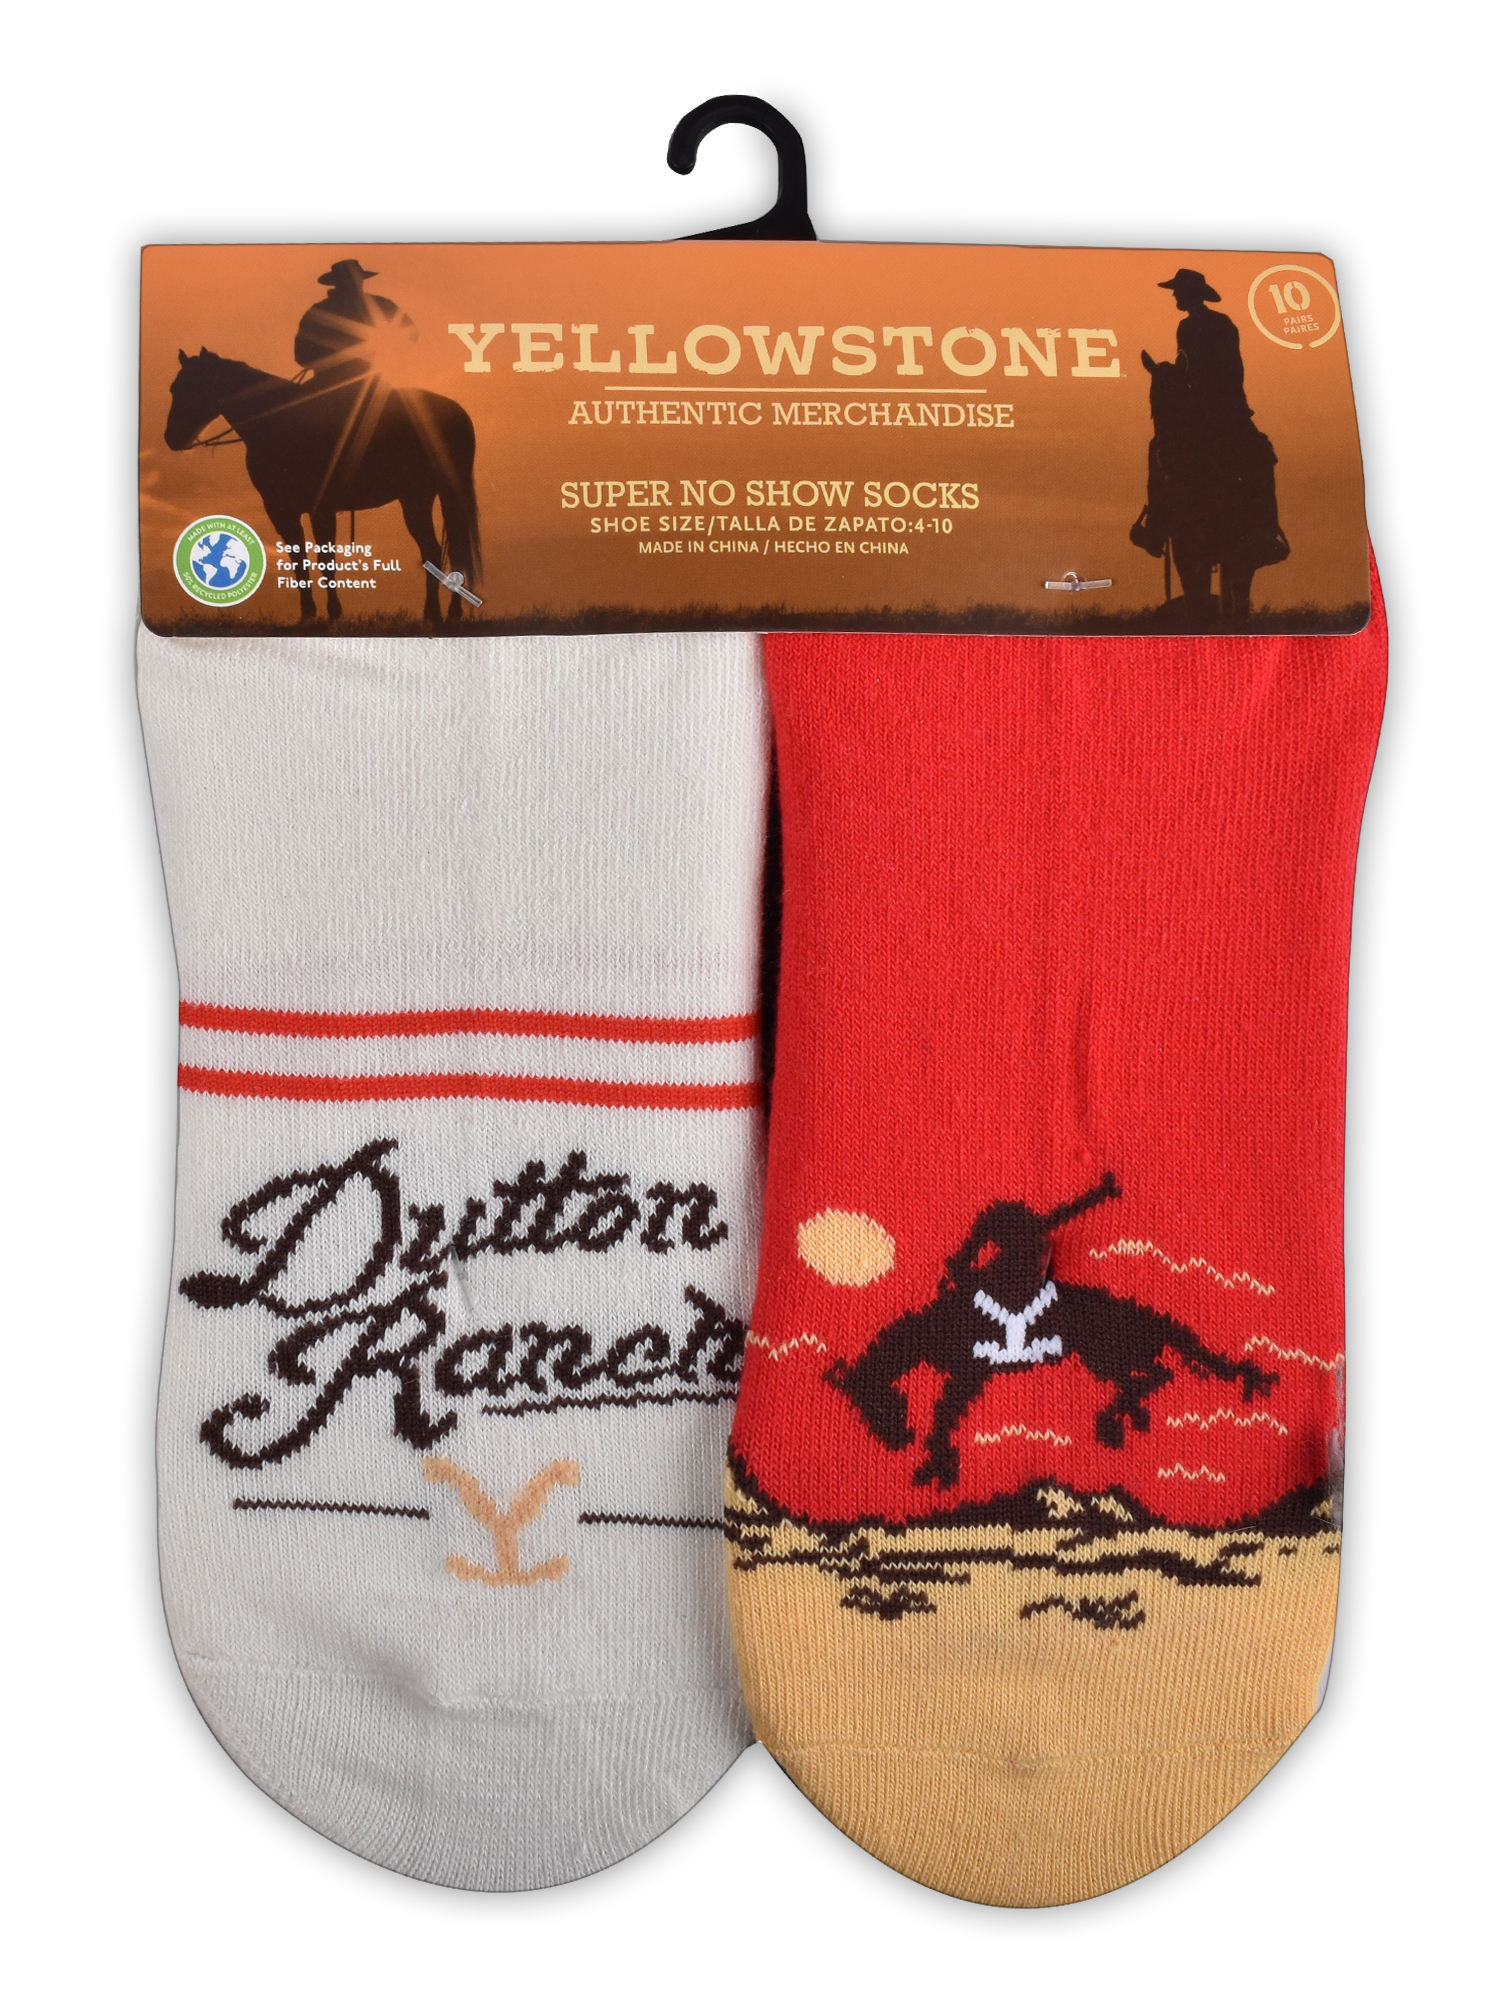 Yellowstone Womens Graphic Super No Show Socks, 10-Pack, Sizes 4-10 - image 2 of 5